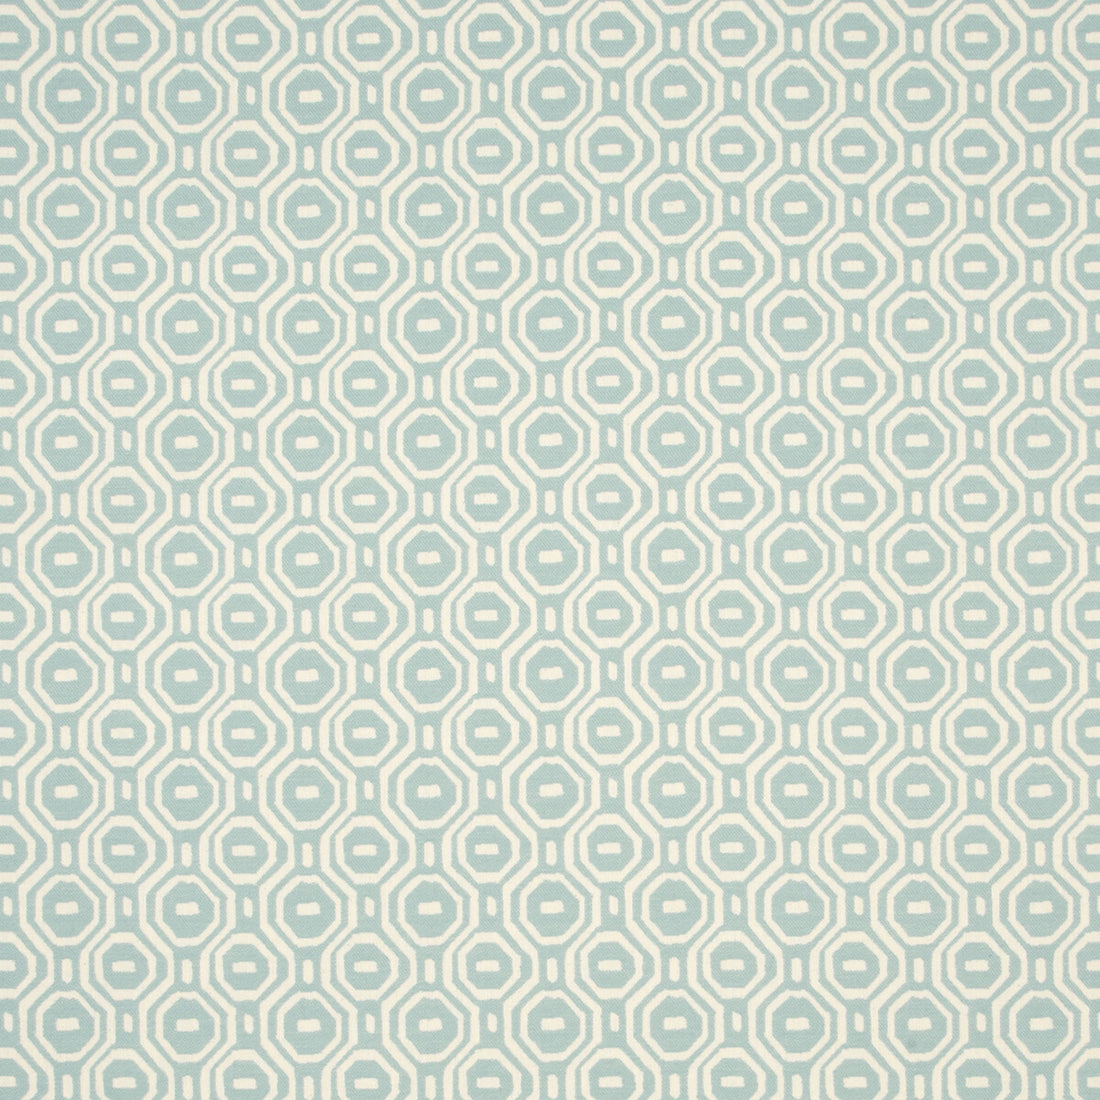 Gotska fabric in glacier color - pattern F0995/02.CAC.0 - by Clarke And Clarke in the Wilderness By Studio G For C&amp;C collection